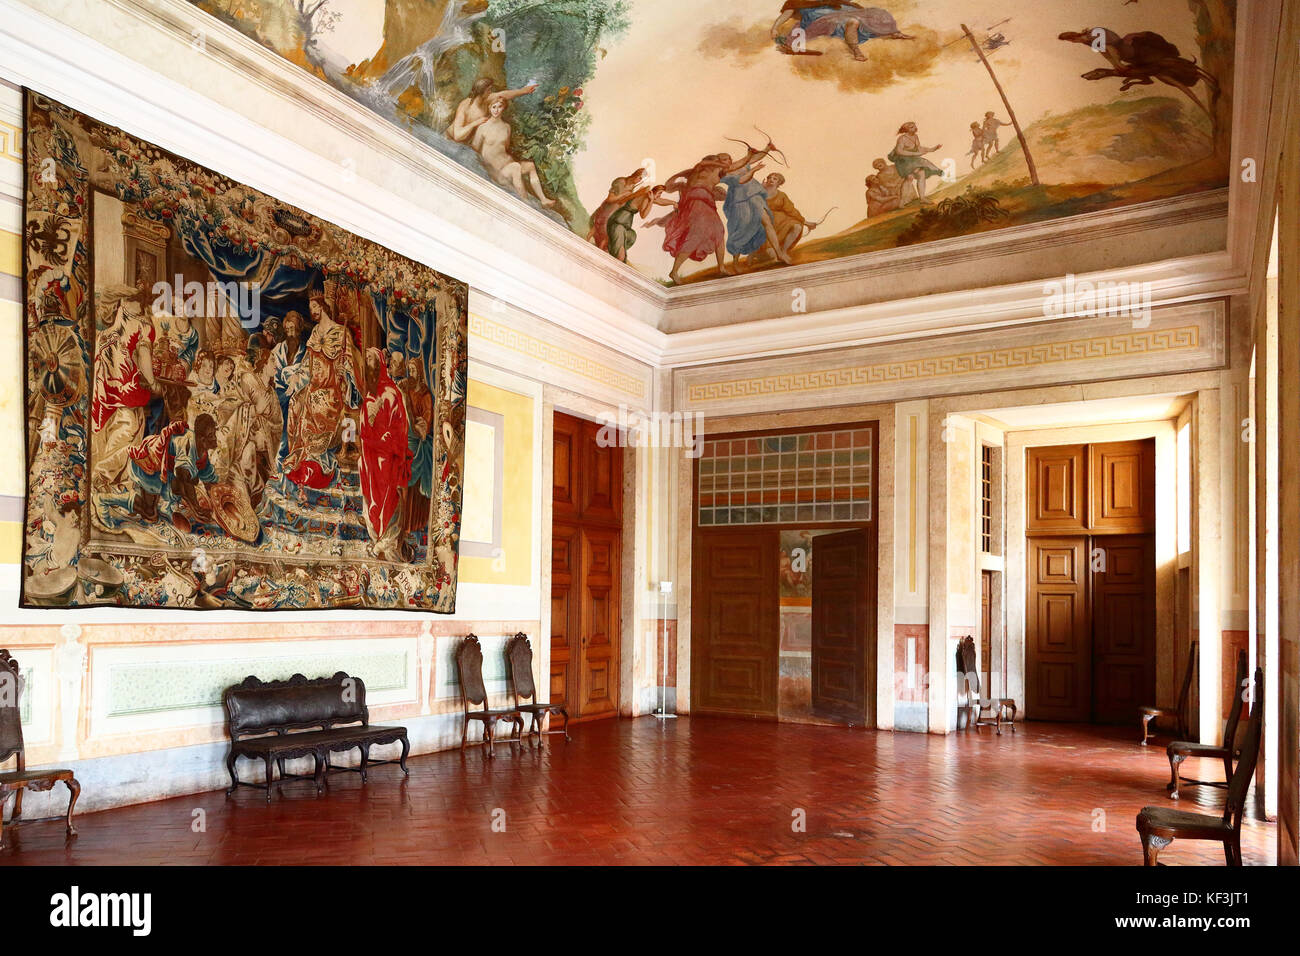 The National Palace in Mafra, Portugal, is decorated with priceless furniture, paintings and accessories Stock Photo